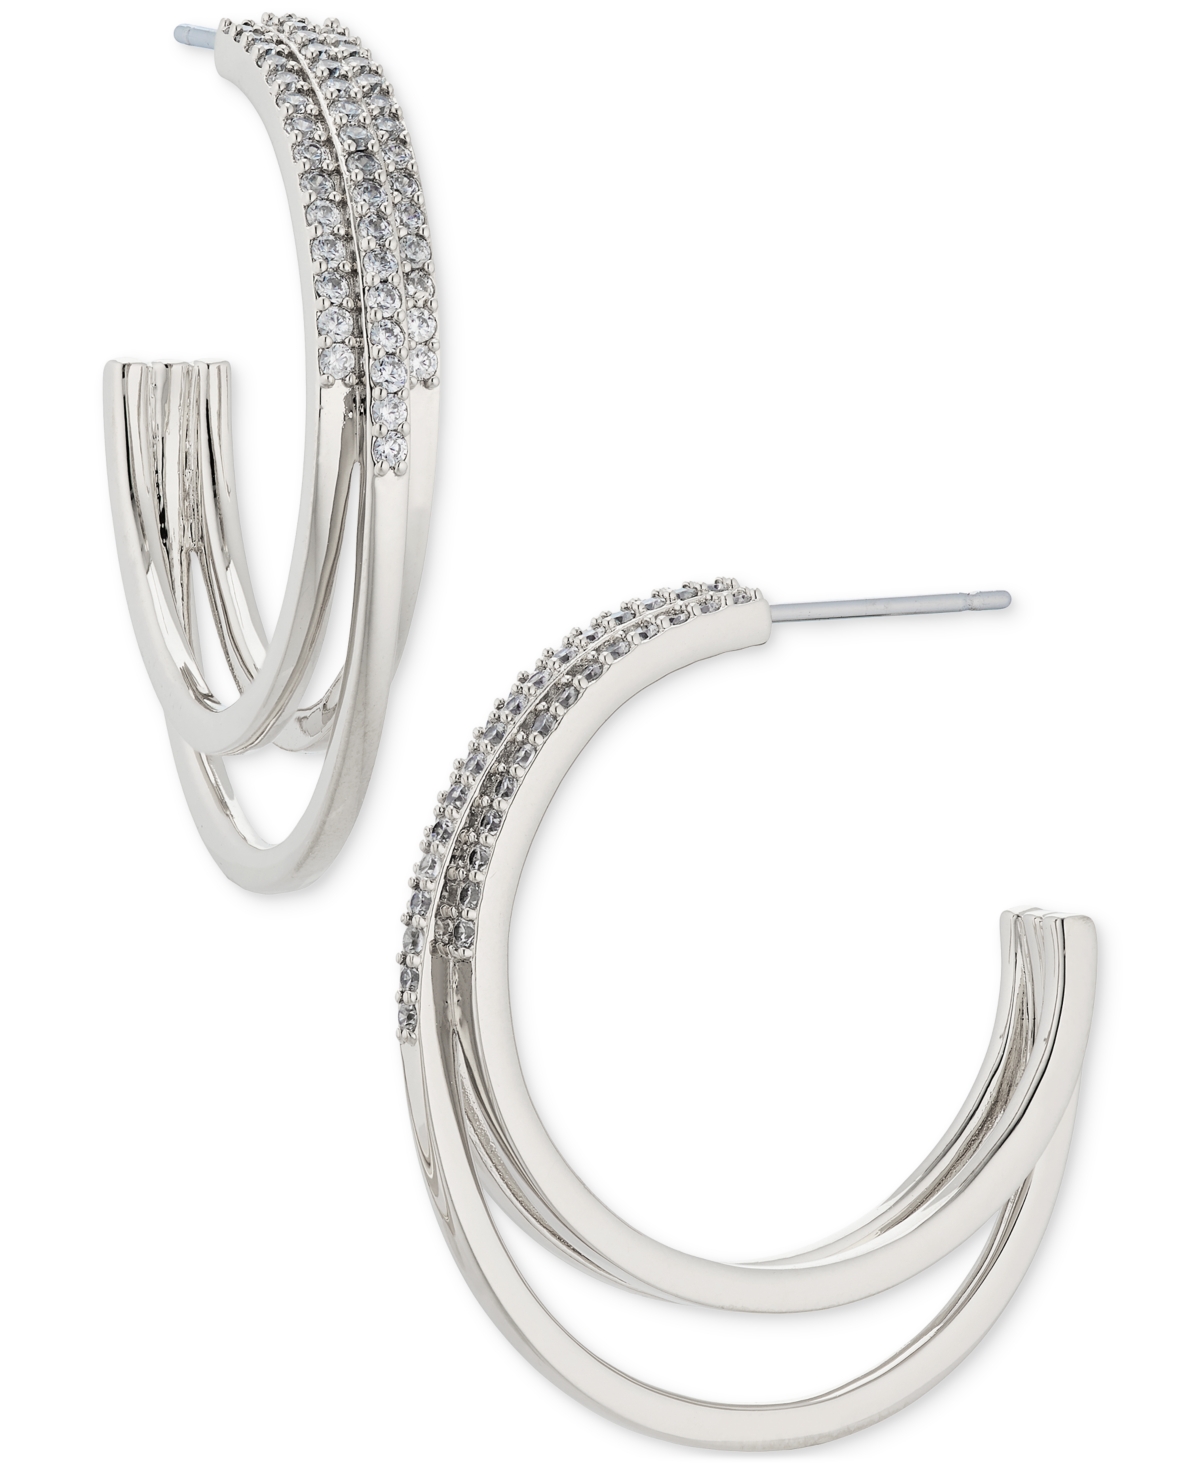 18k Gold-Plated Medium Pave Triple-Row C-Hoop Earrings, 1.12", Created for Macy's - Silver